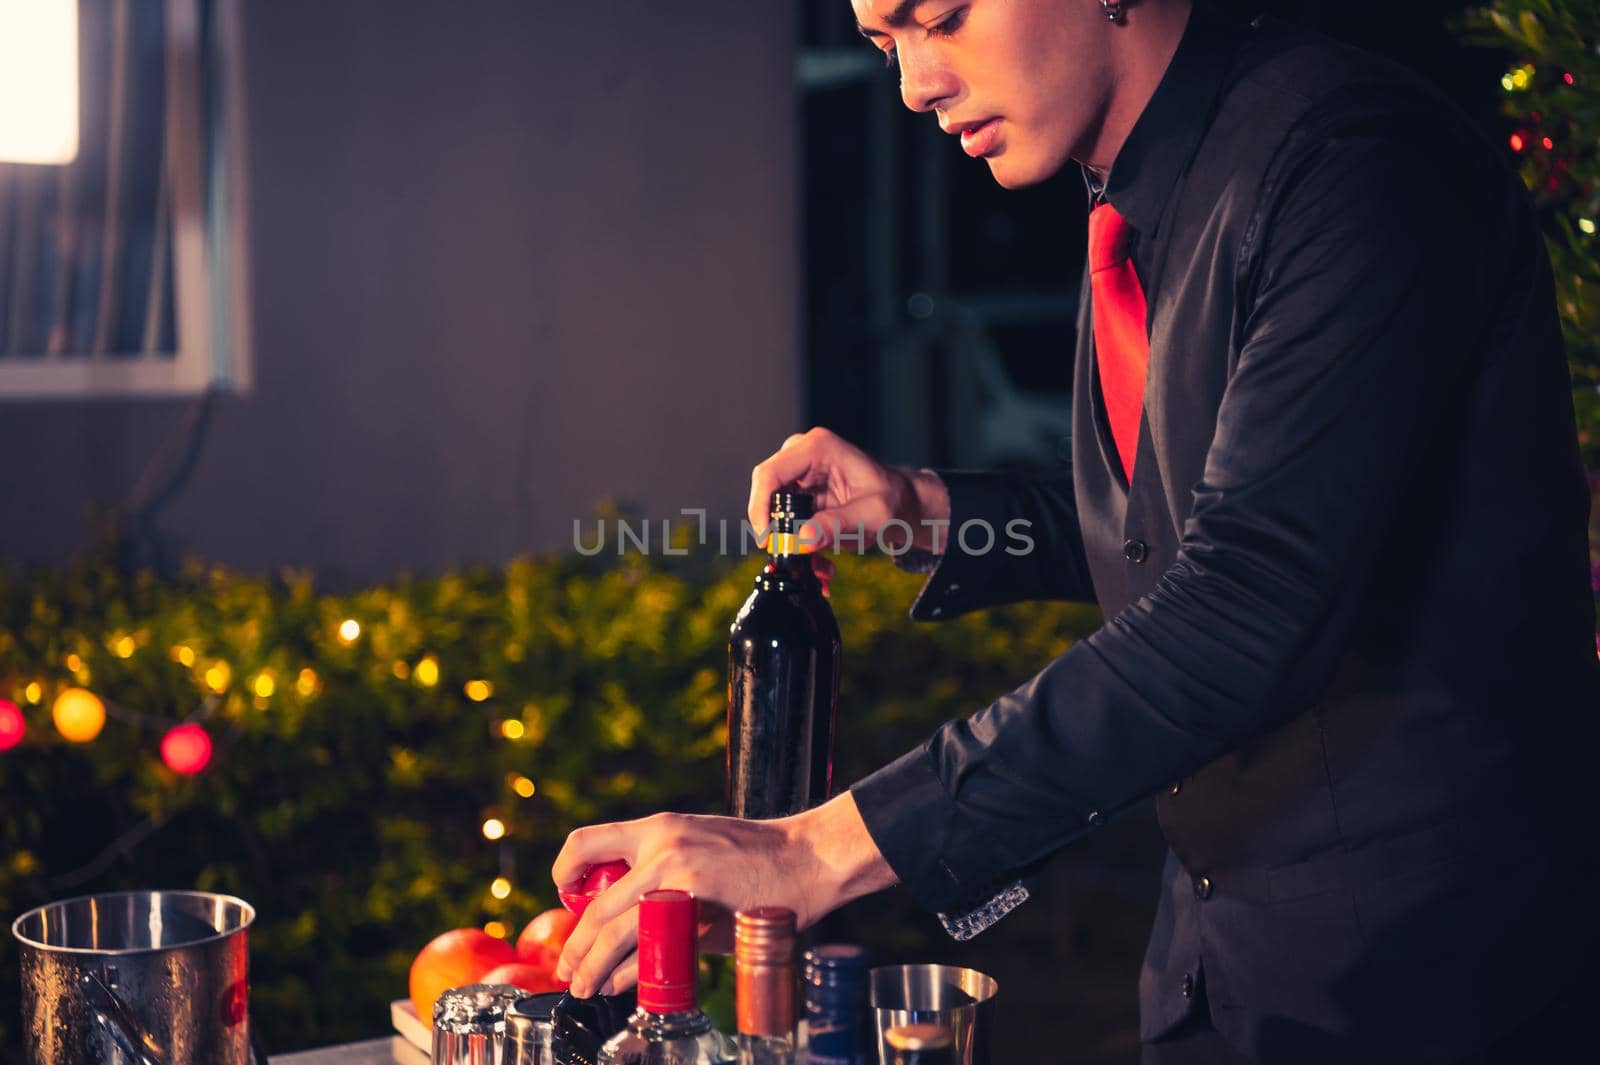 Professional bartender preparing fresh lime lemonade cocktail in drinking wine glass with ice at night bar clubbing counter. Occupation and people lifestyles concept. Outdoor background by MiniStocker